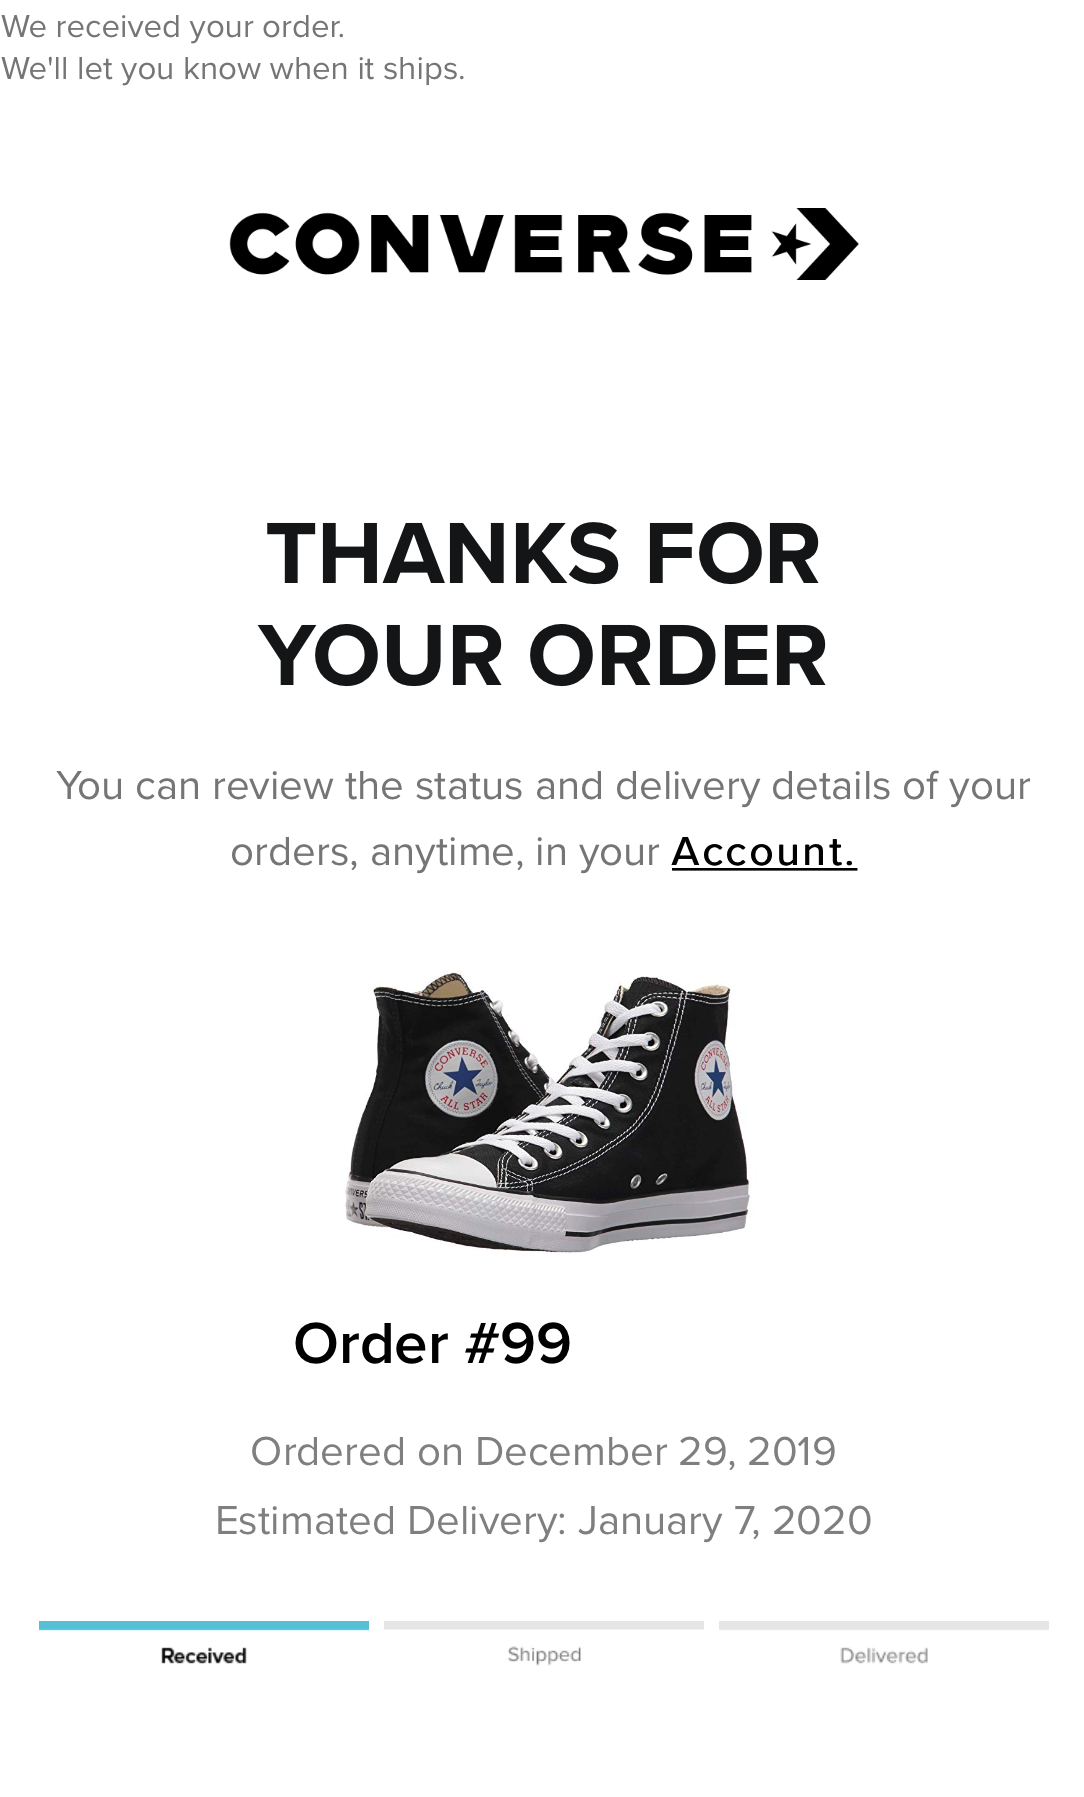 converse order confirmation email example